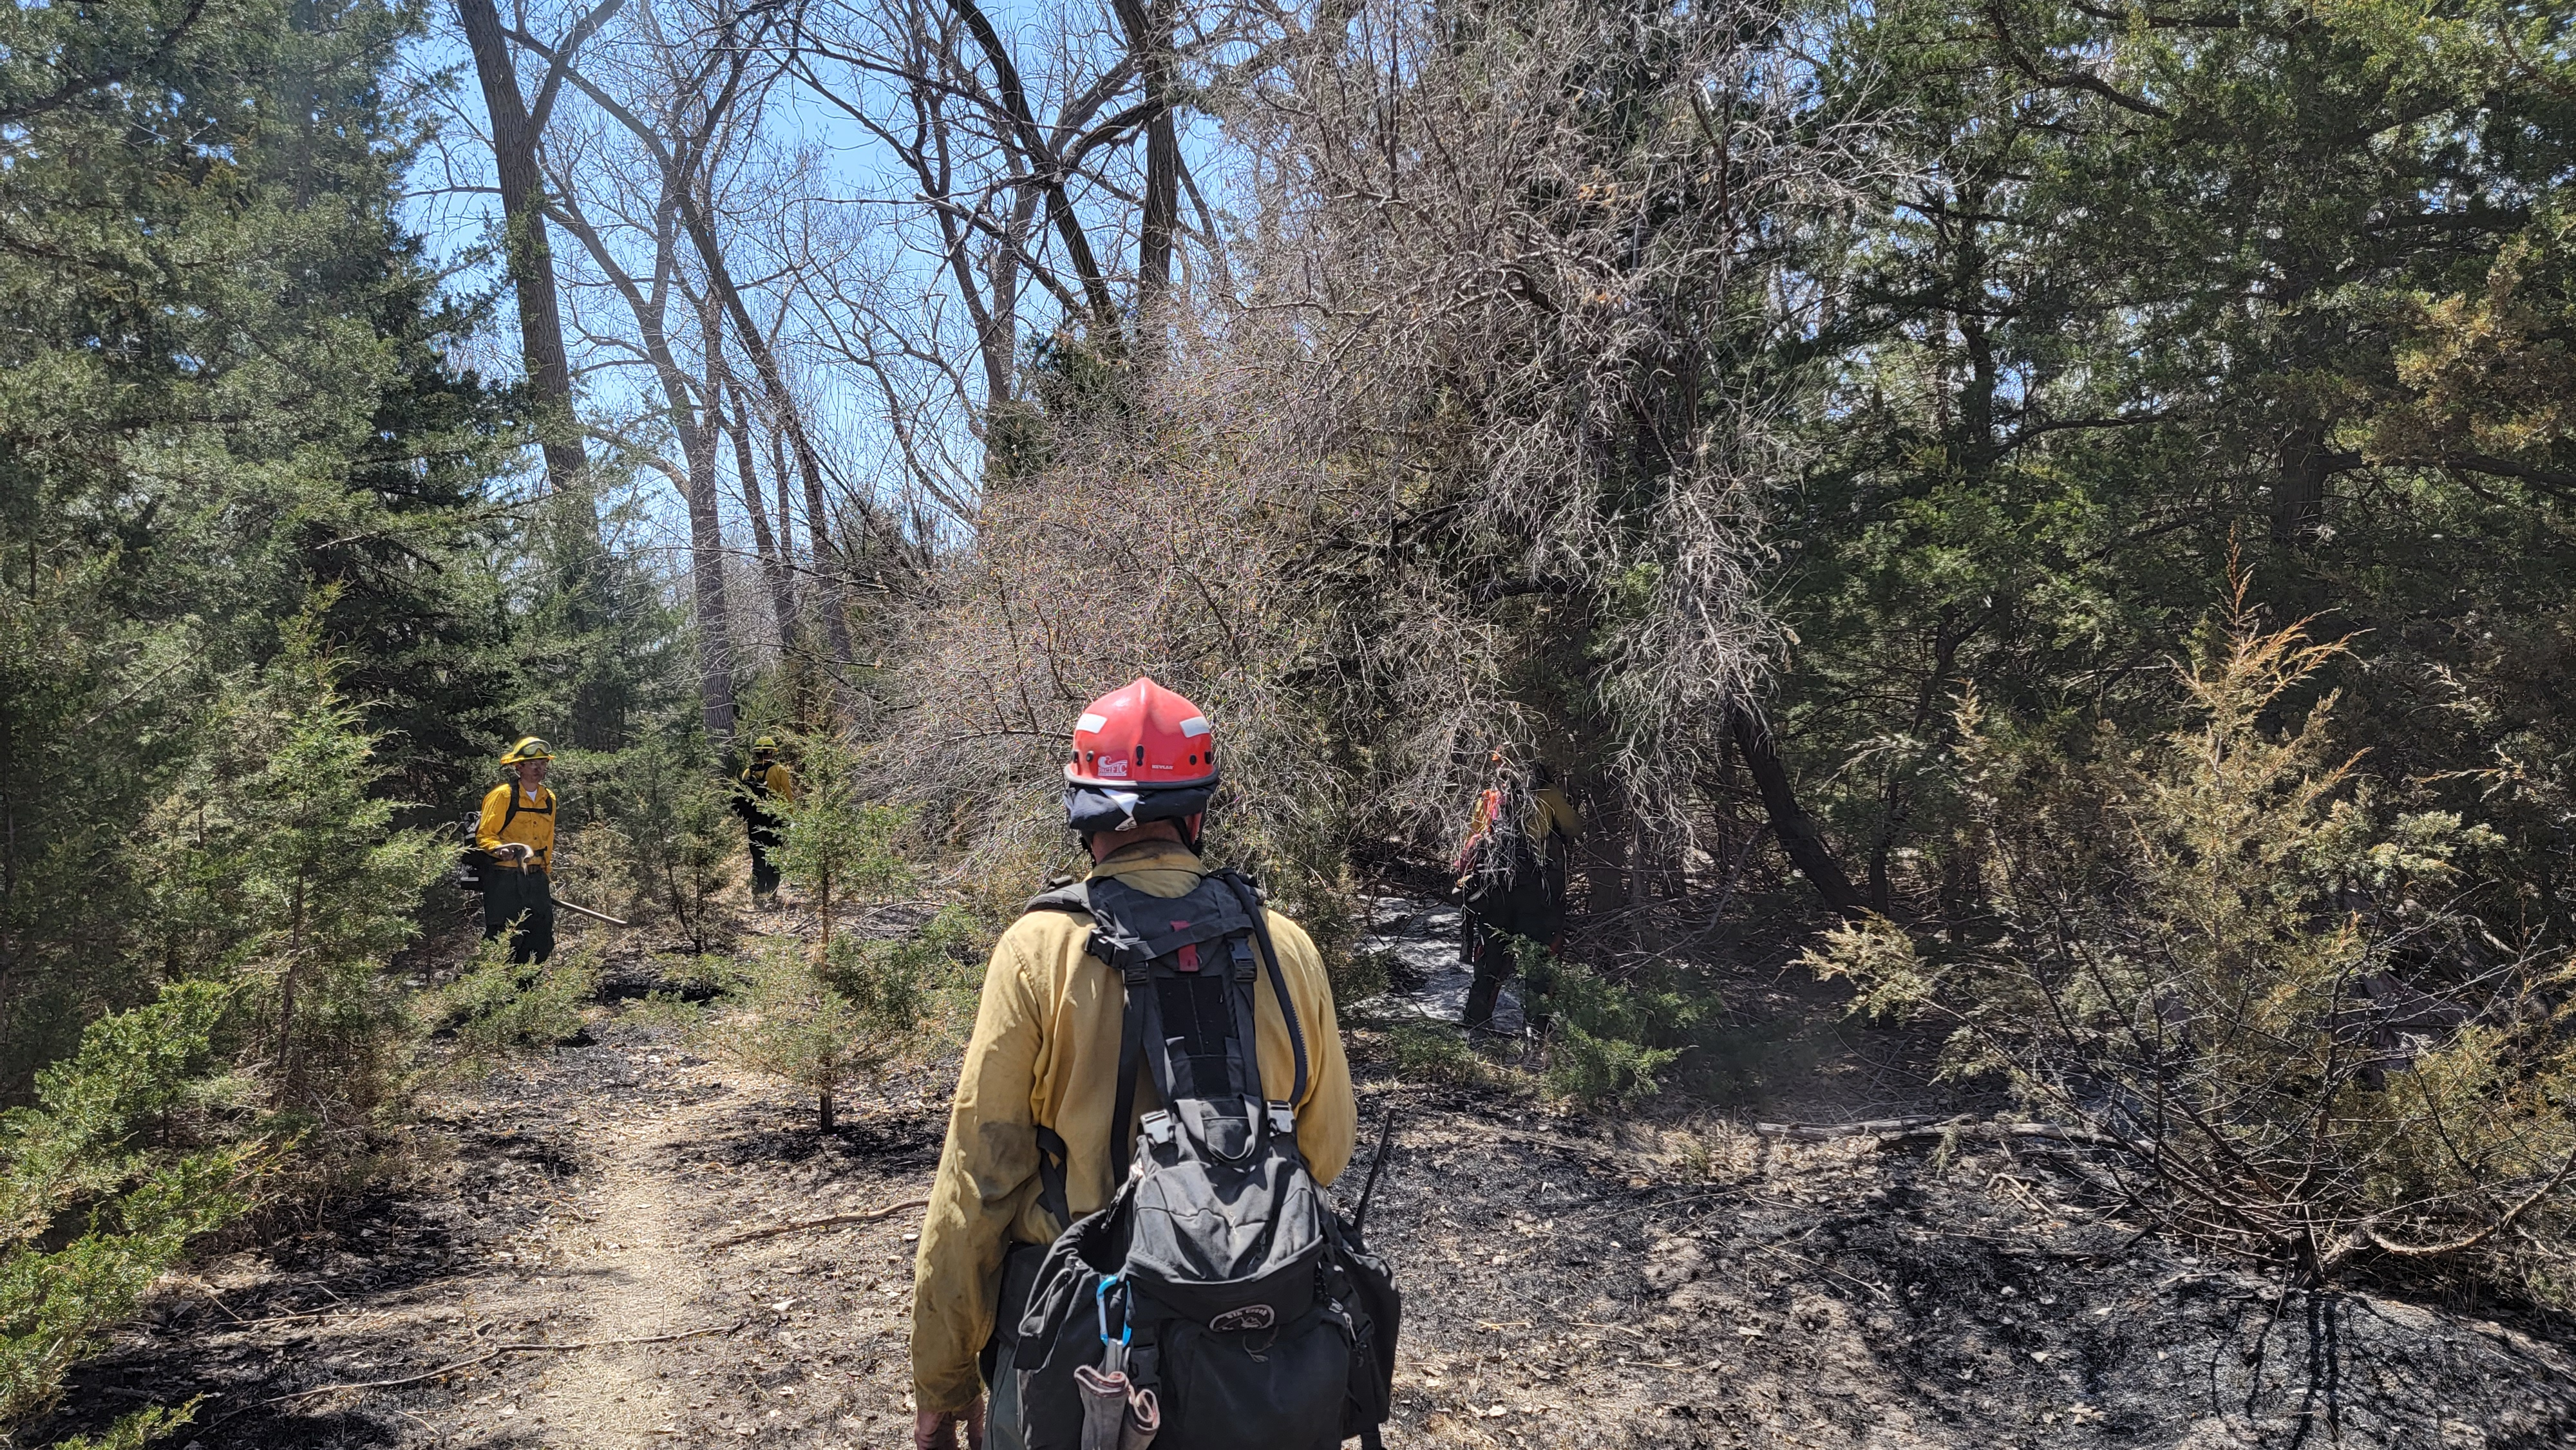 Firefighters walking through trees, looking for hot spots.